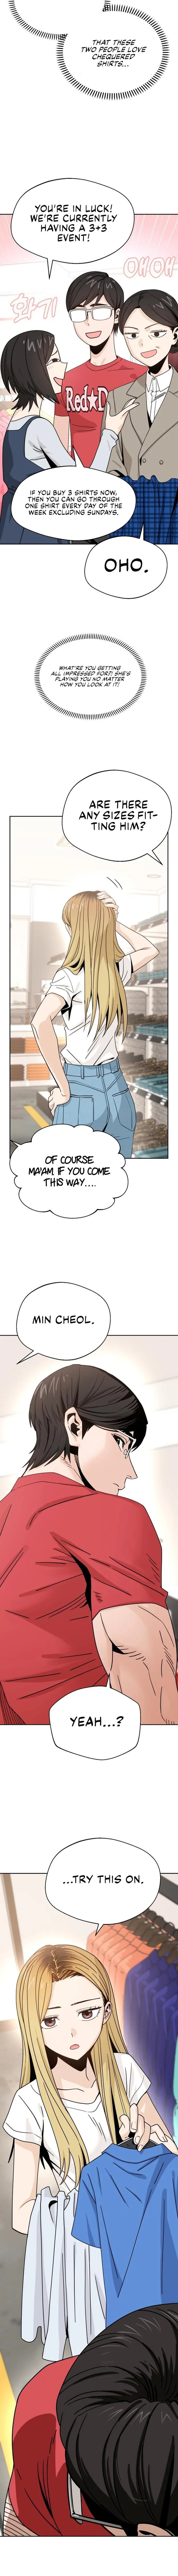 Match Made In Heaven By Chance Chapter 51 Page 7